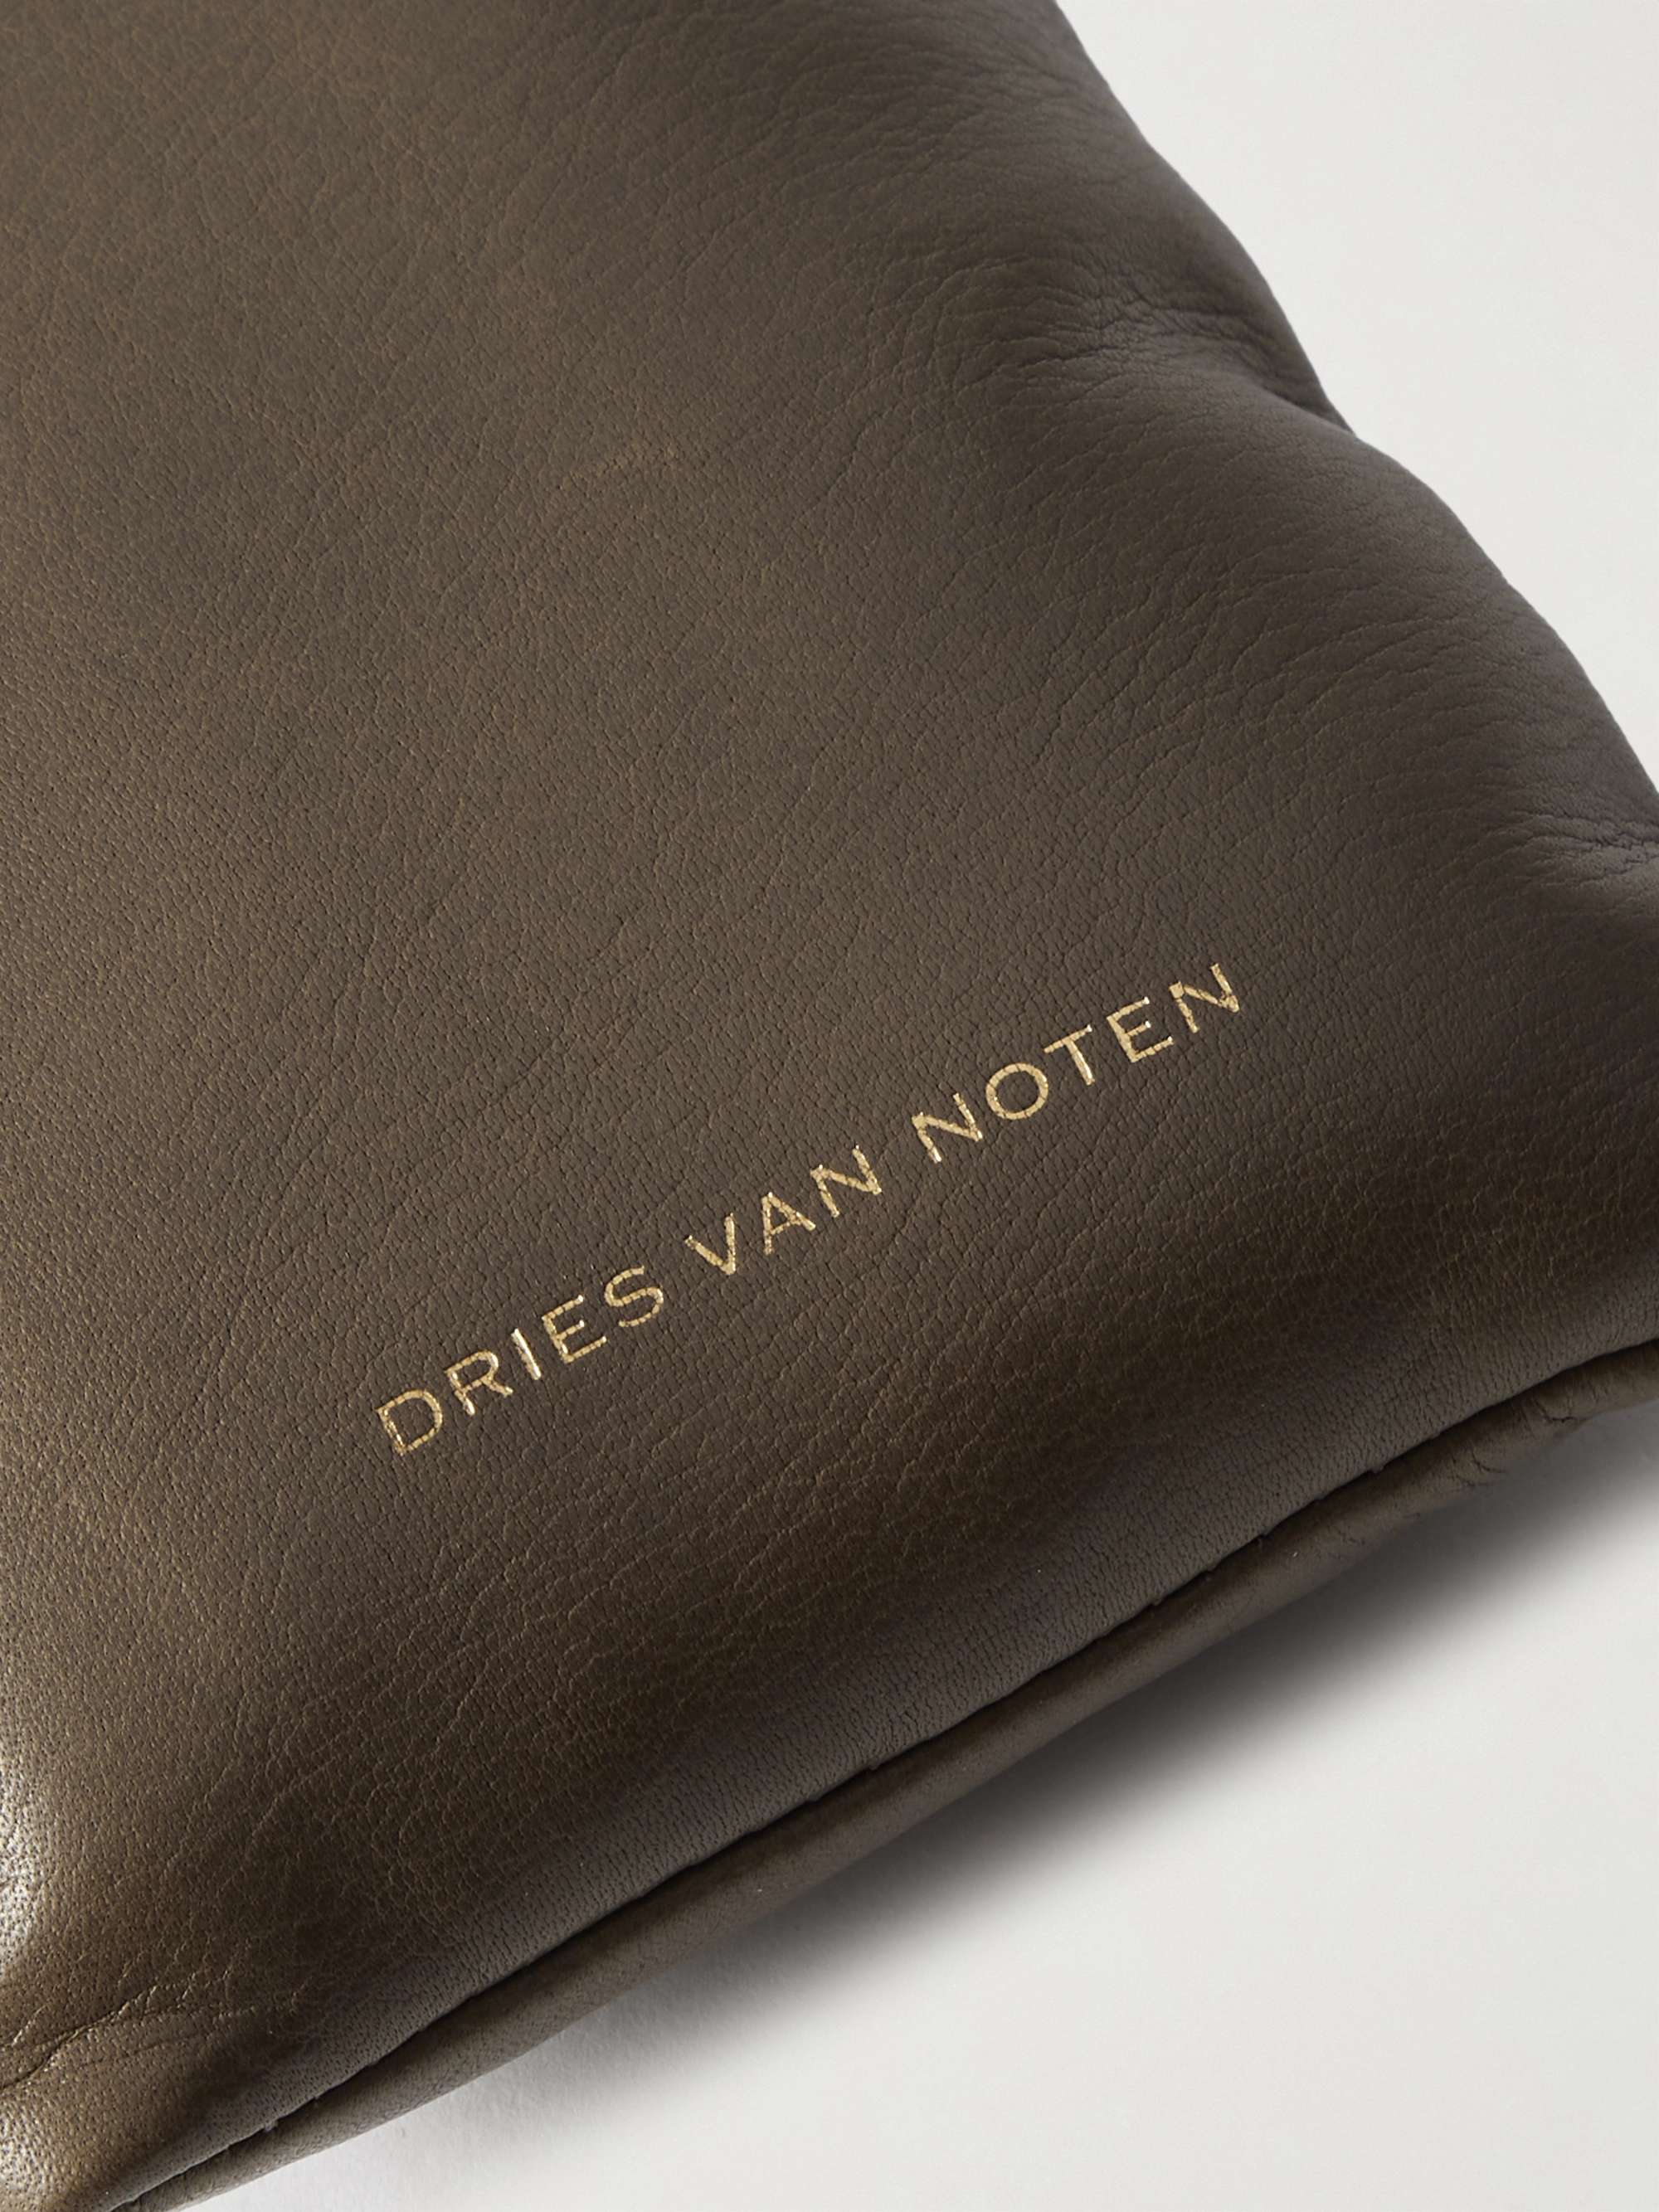 DRIES VAN NOTEN Logo-Debossed Padded Leather Pouch with Lanyard